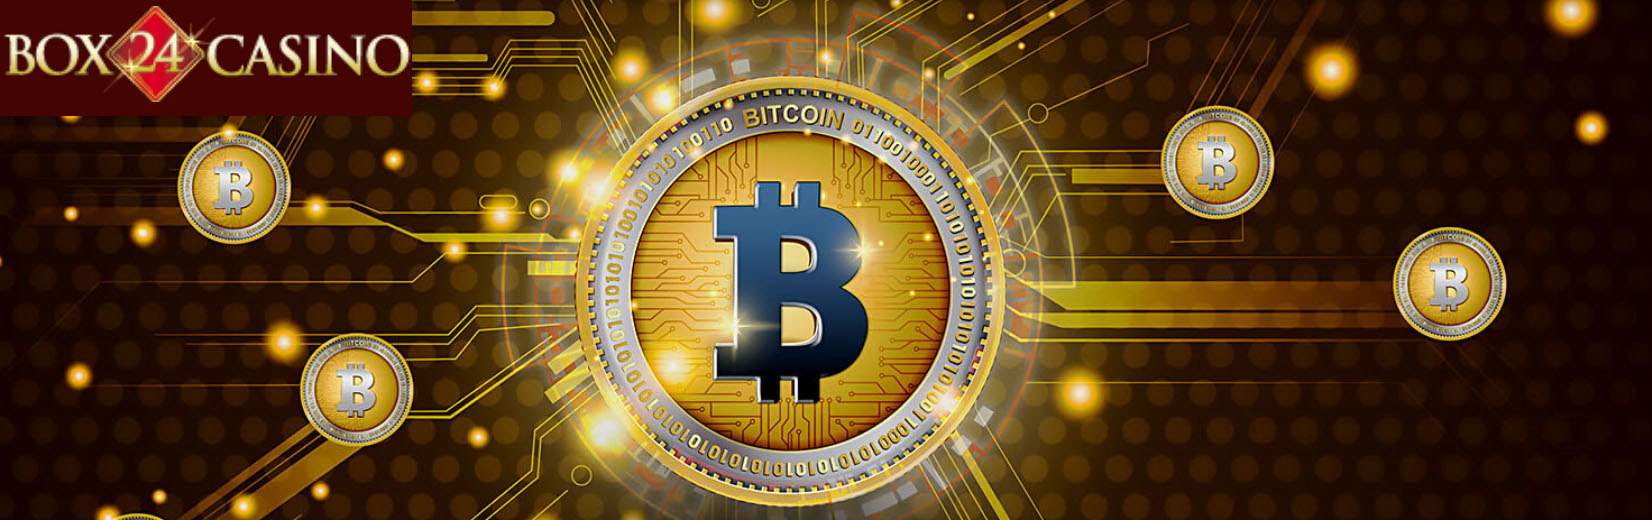 Boost Your Bankroll with Bitcoin at Box 24 Casino